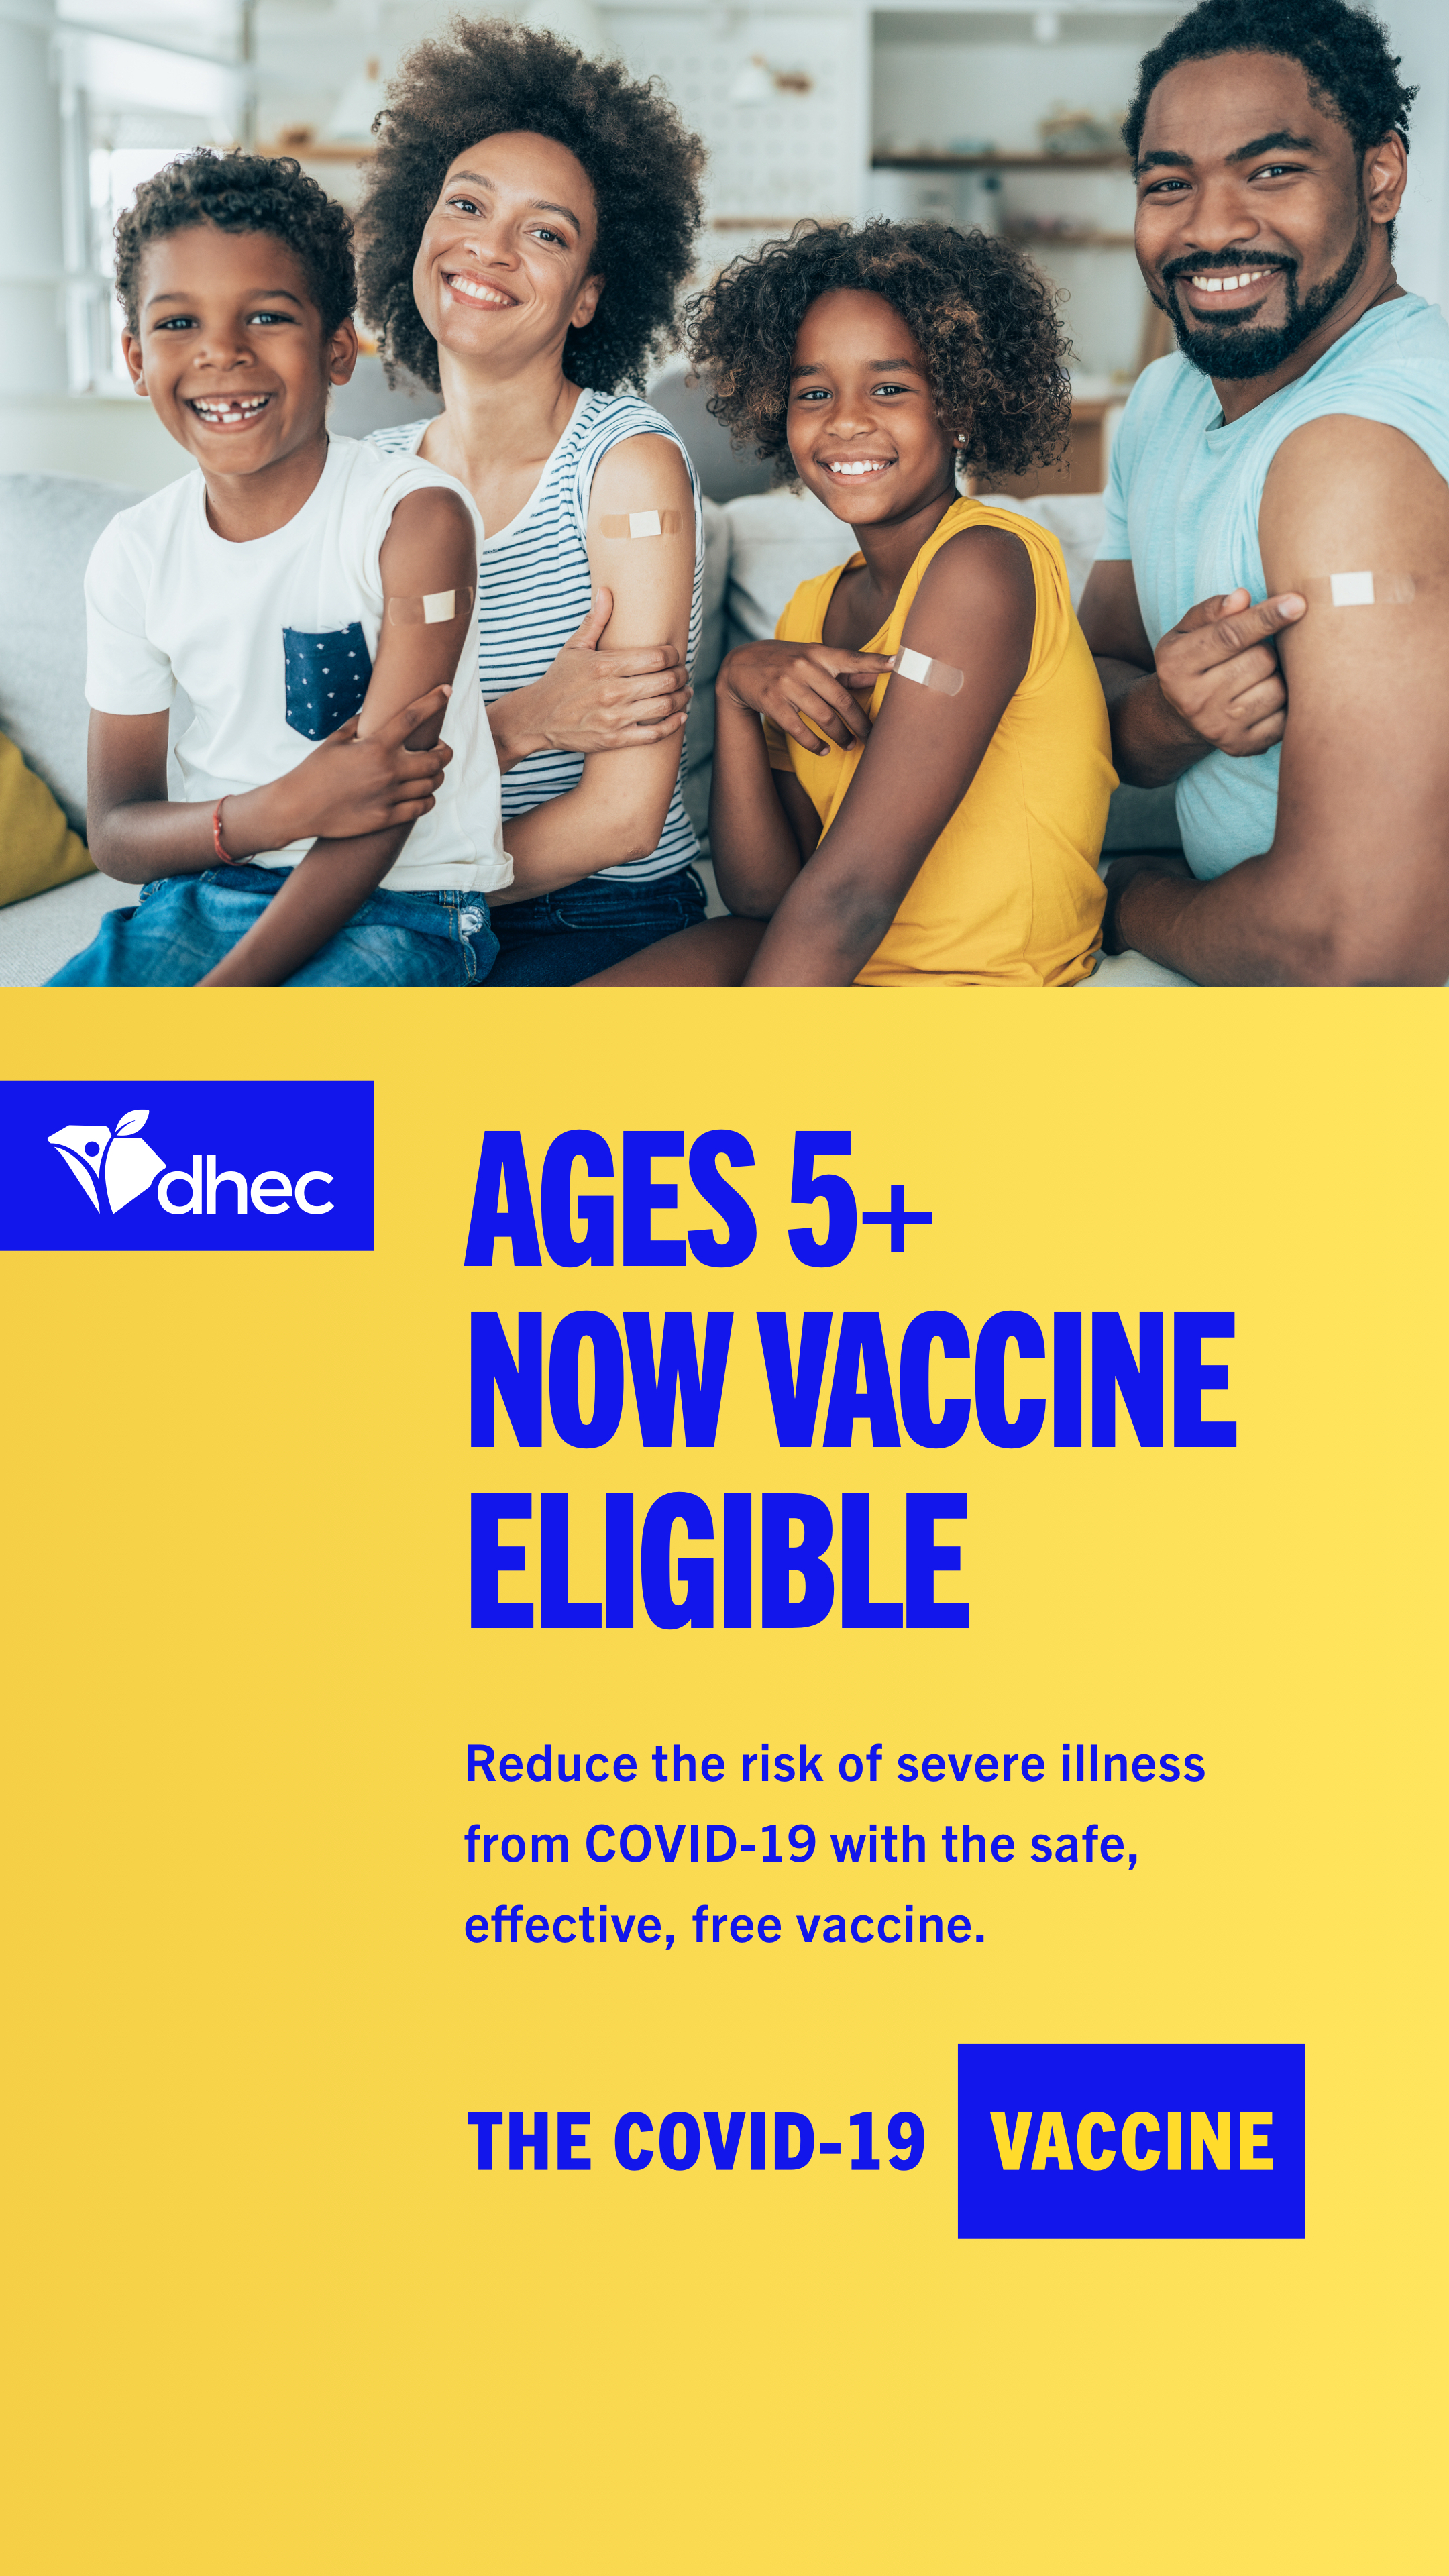 Ages 5+ now vaccine eligible